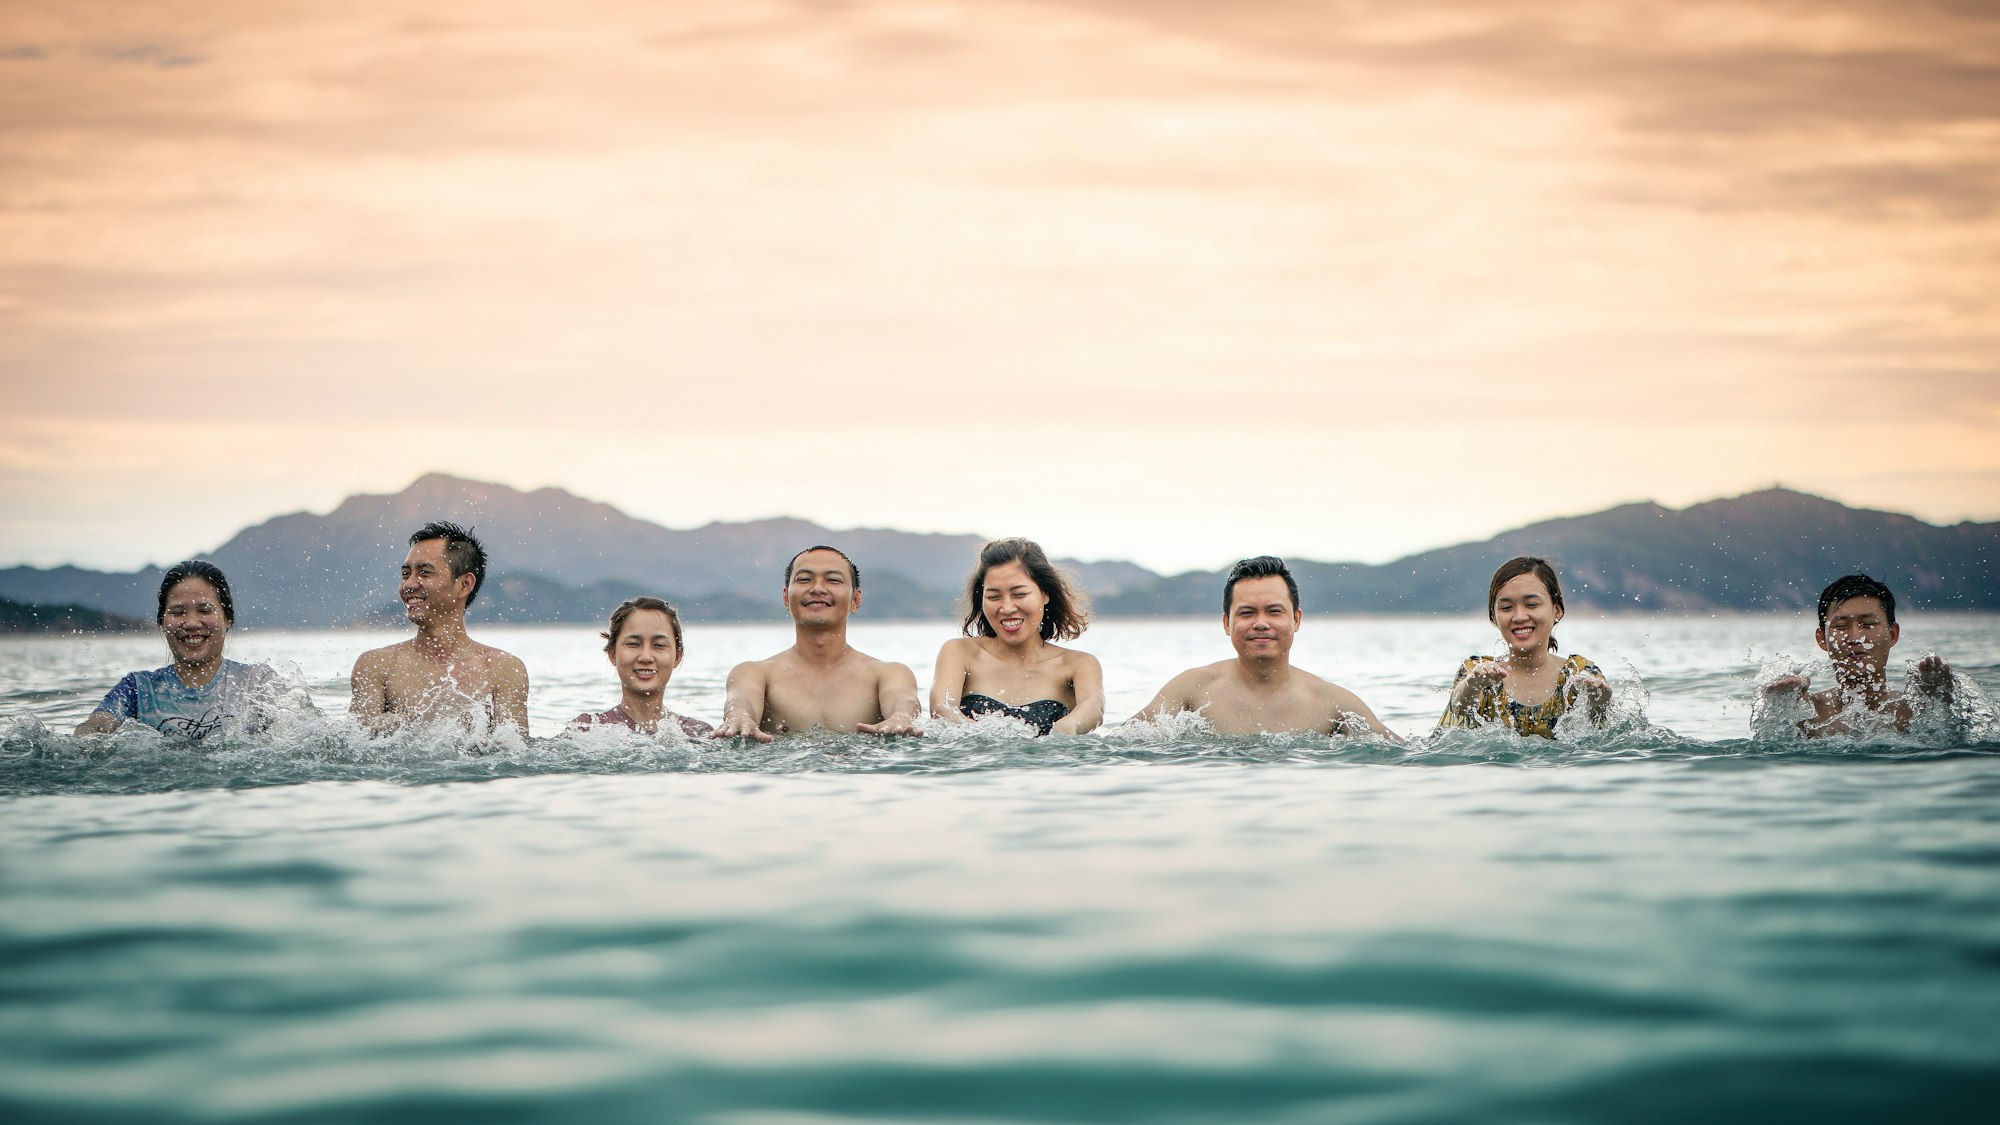 Seven people lined up, facing the camera, in the water. One of them has her eyes closed.